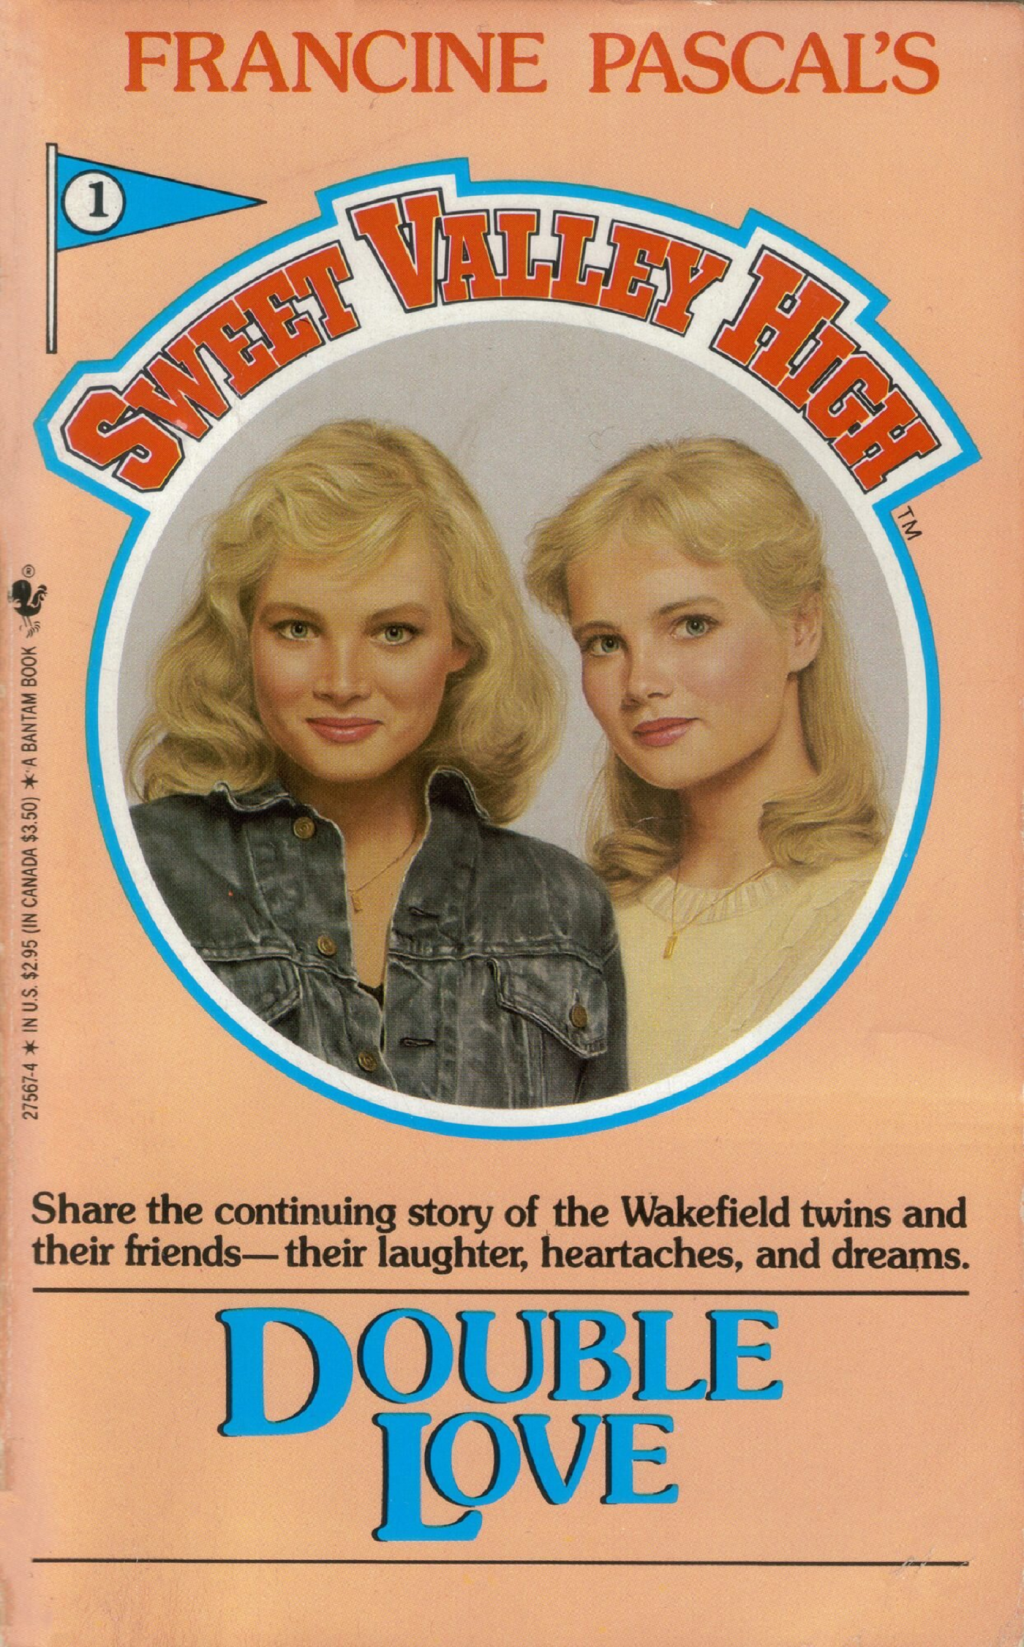 Sweet Valley High - Double Love by Francine Pascal (Random House, 1983) - listen to Emma Burnell and Tim Worthington talking about it in Looks Unfamiliar.